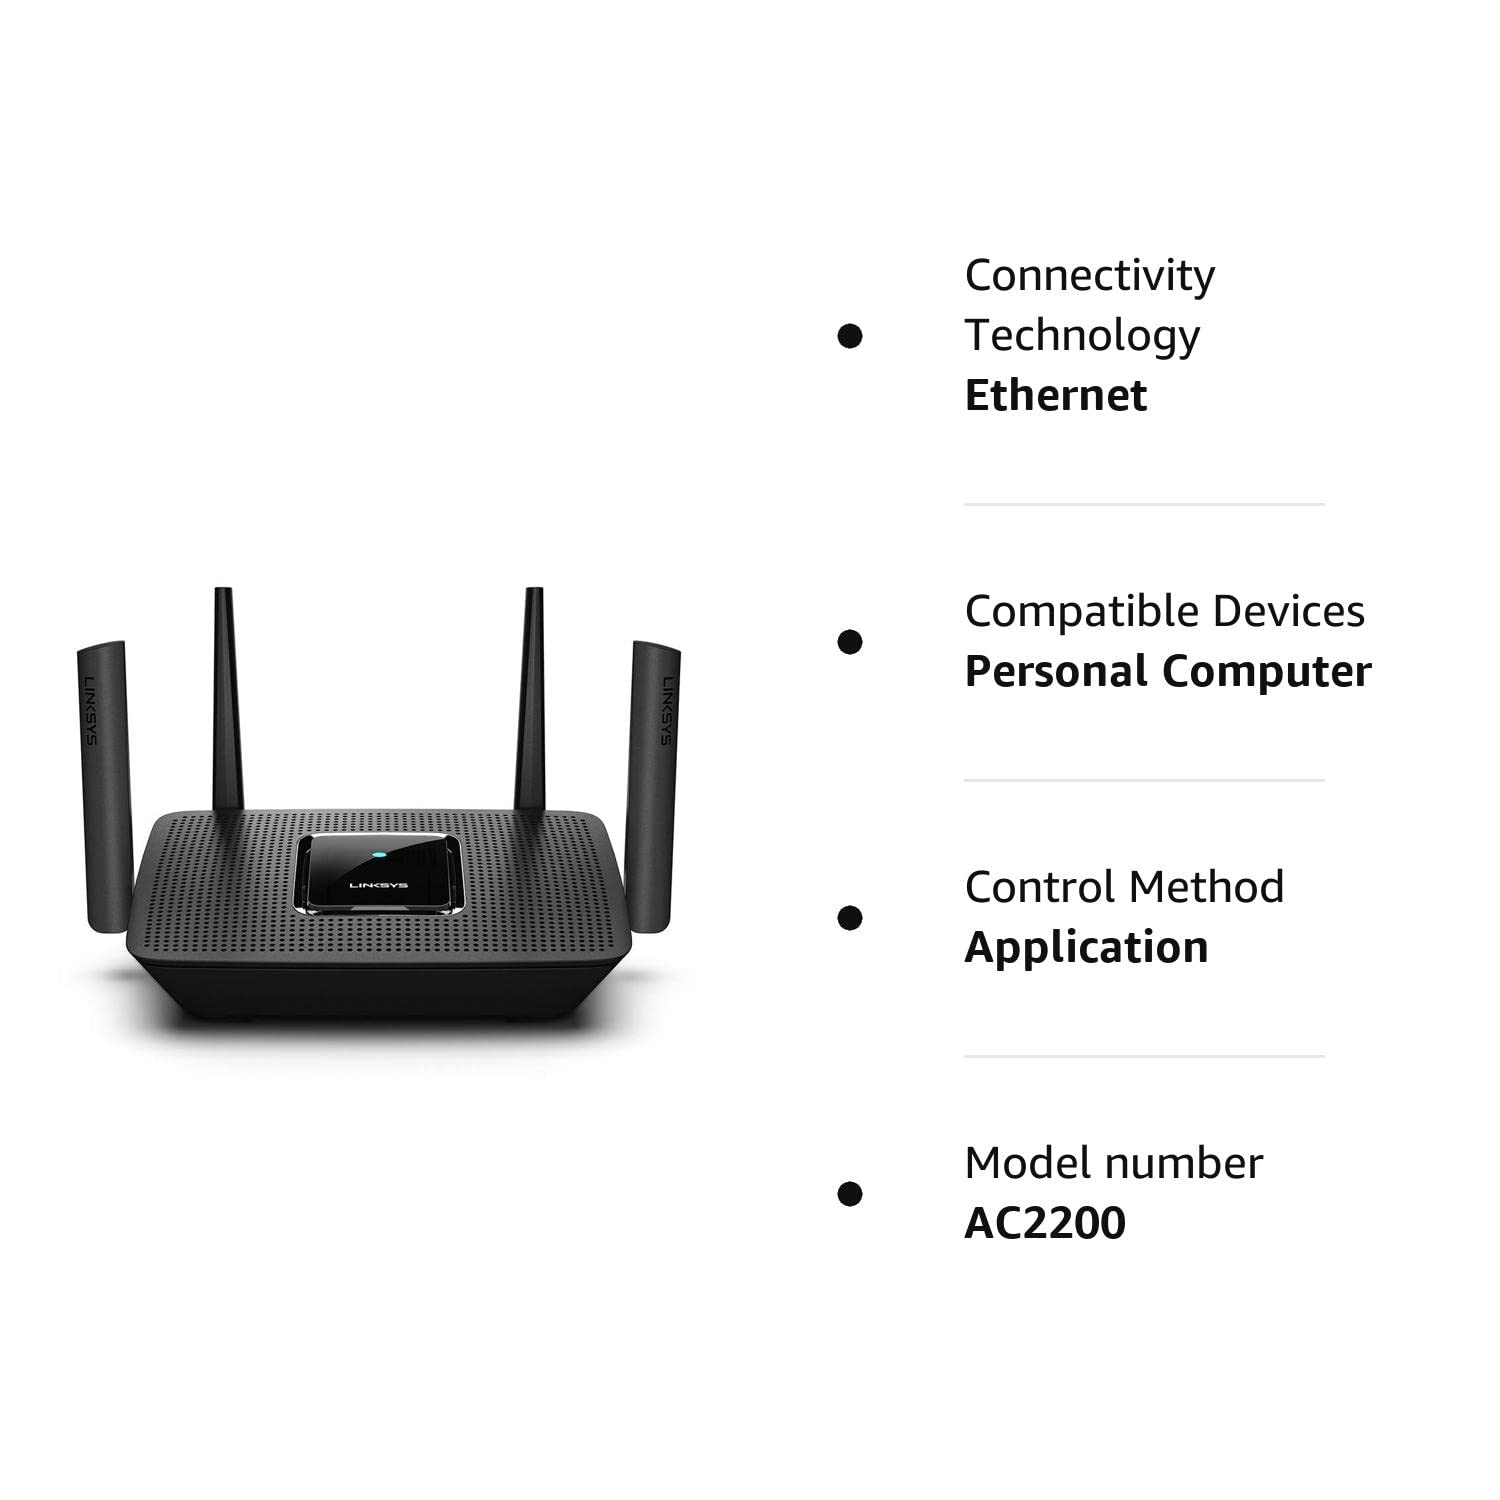 Linksys MR8300 Mesh Wi-Fi Router (Tri-Band Router speeds up to 2.2GHz, Wireless Mesh Router for Home AC2200, 716Mhz Quad-core Processor, 2,000 sq. ft Coverage) MU-MIMO Fast Wireless Router (Renewed)